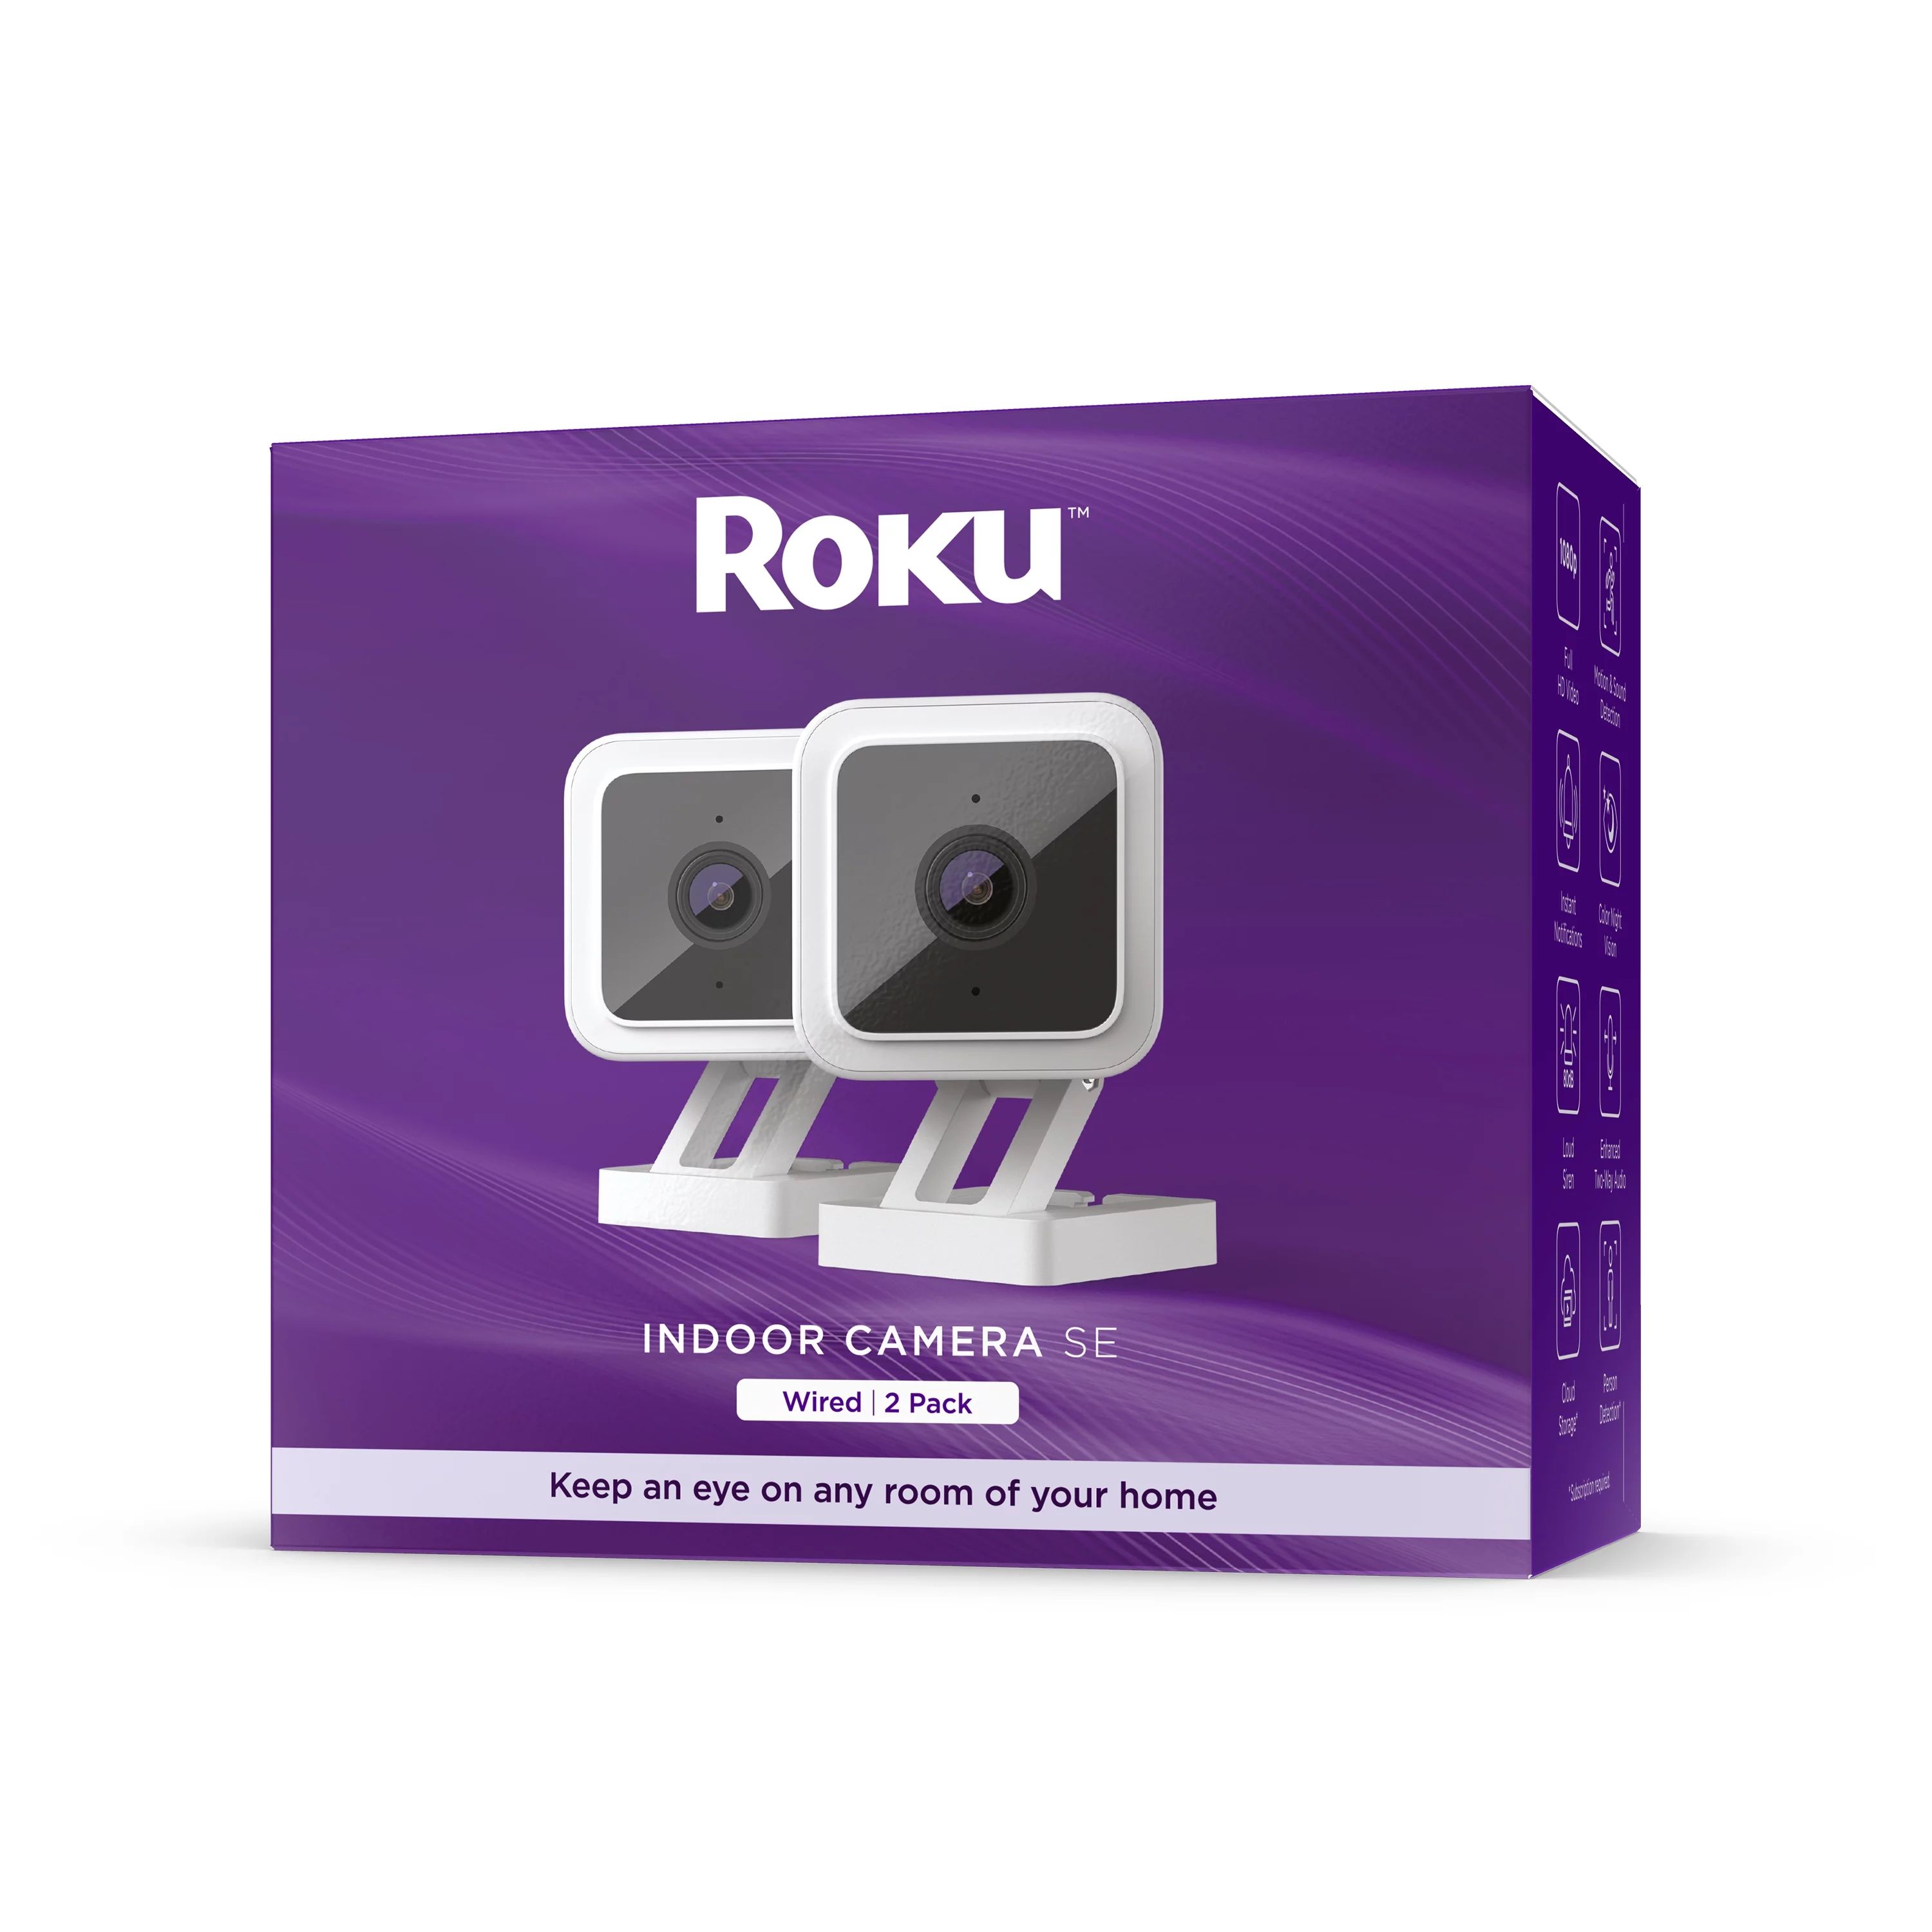 Roku Smart Home Indoor Camera SE (2-Pack) Wi-Fi-Connected - Wired Security Surveillance Camera wi... | Walmart (US)